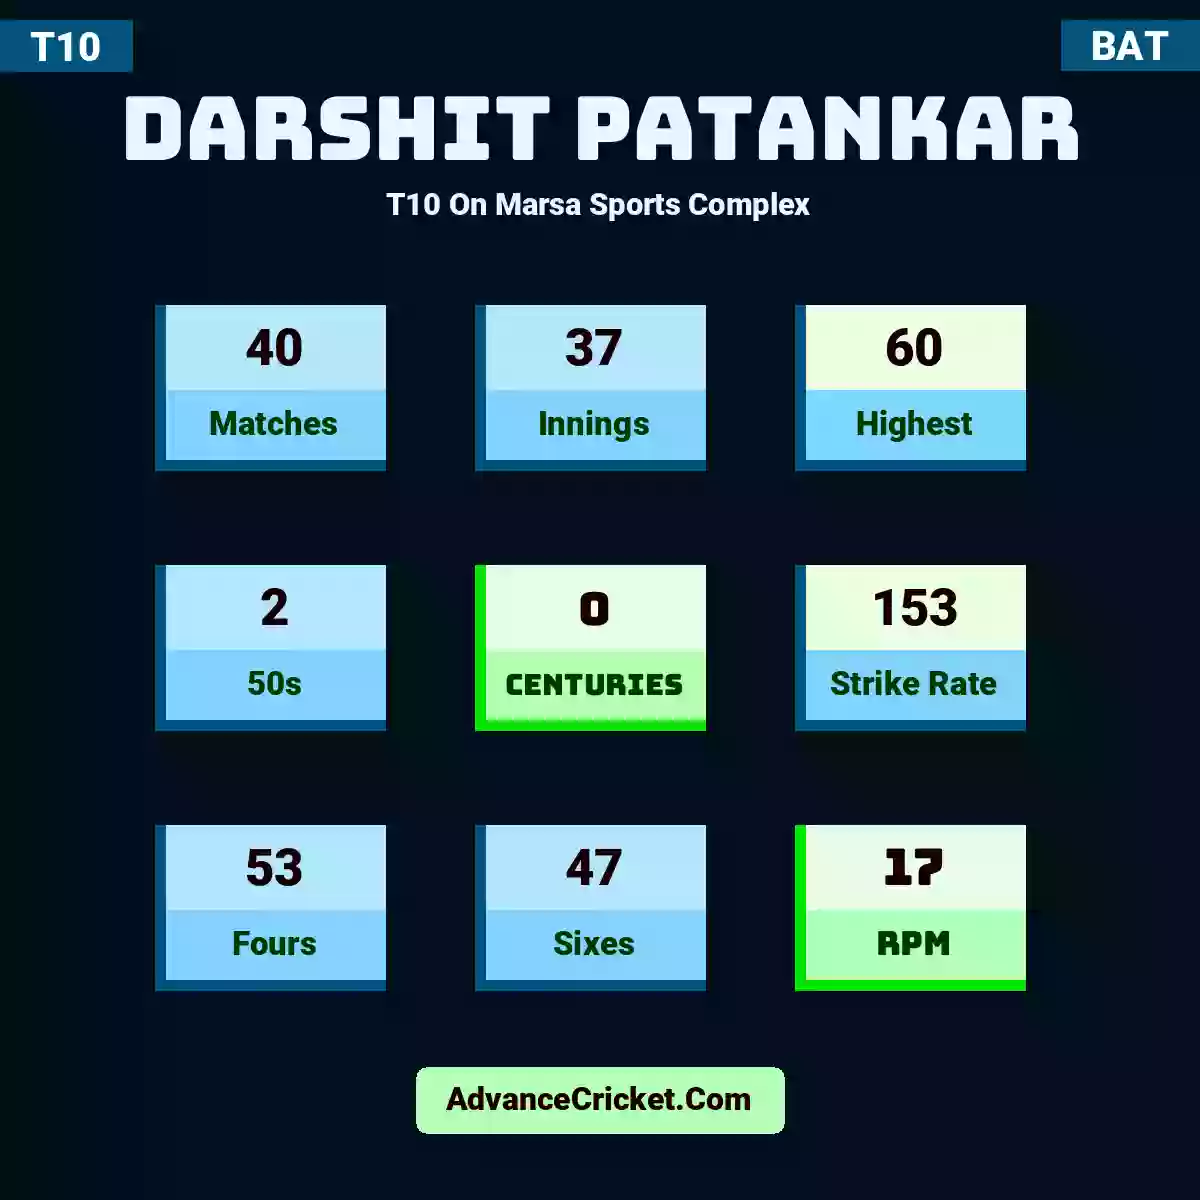 Darshit Patankar T10  On Marsa Sports Complex, Darshit Patankar played 40 matches, scored 60 runs as highest, 2 half-centuries, and 0 centuries, with a strike rate of 153. D.Patankar hit 53 fours and 47 sixes, with an RPM of 17.